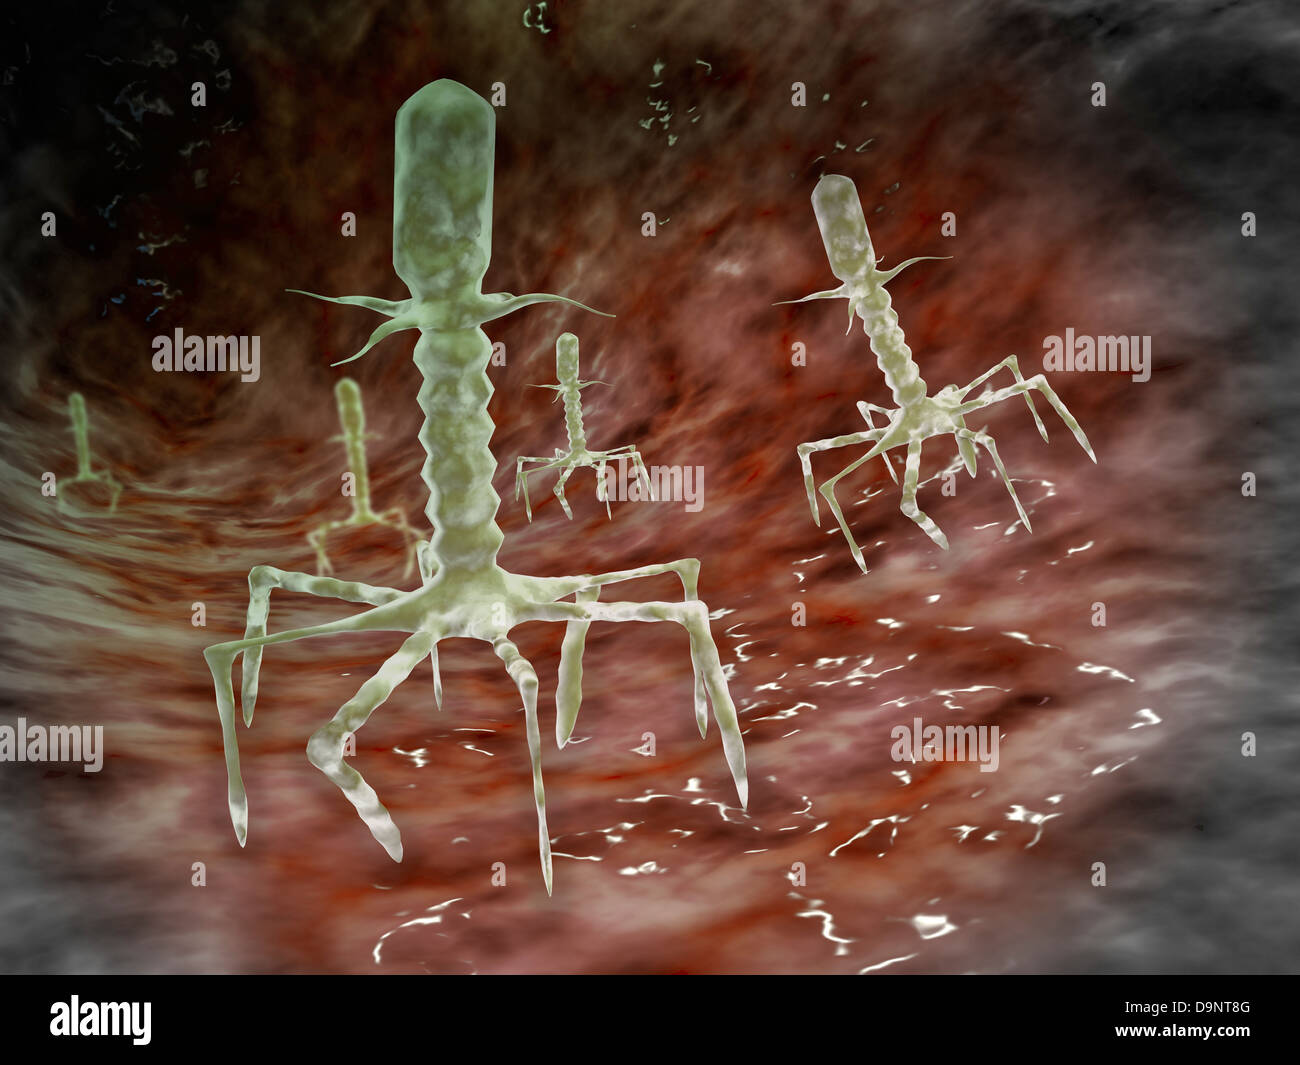 Microscopic view of bacteriophages on the surface of a bacteria. Stock Photo